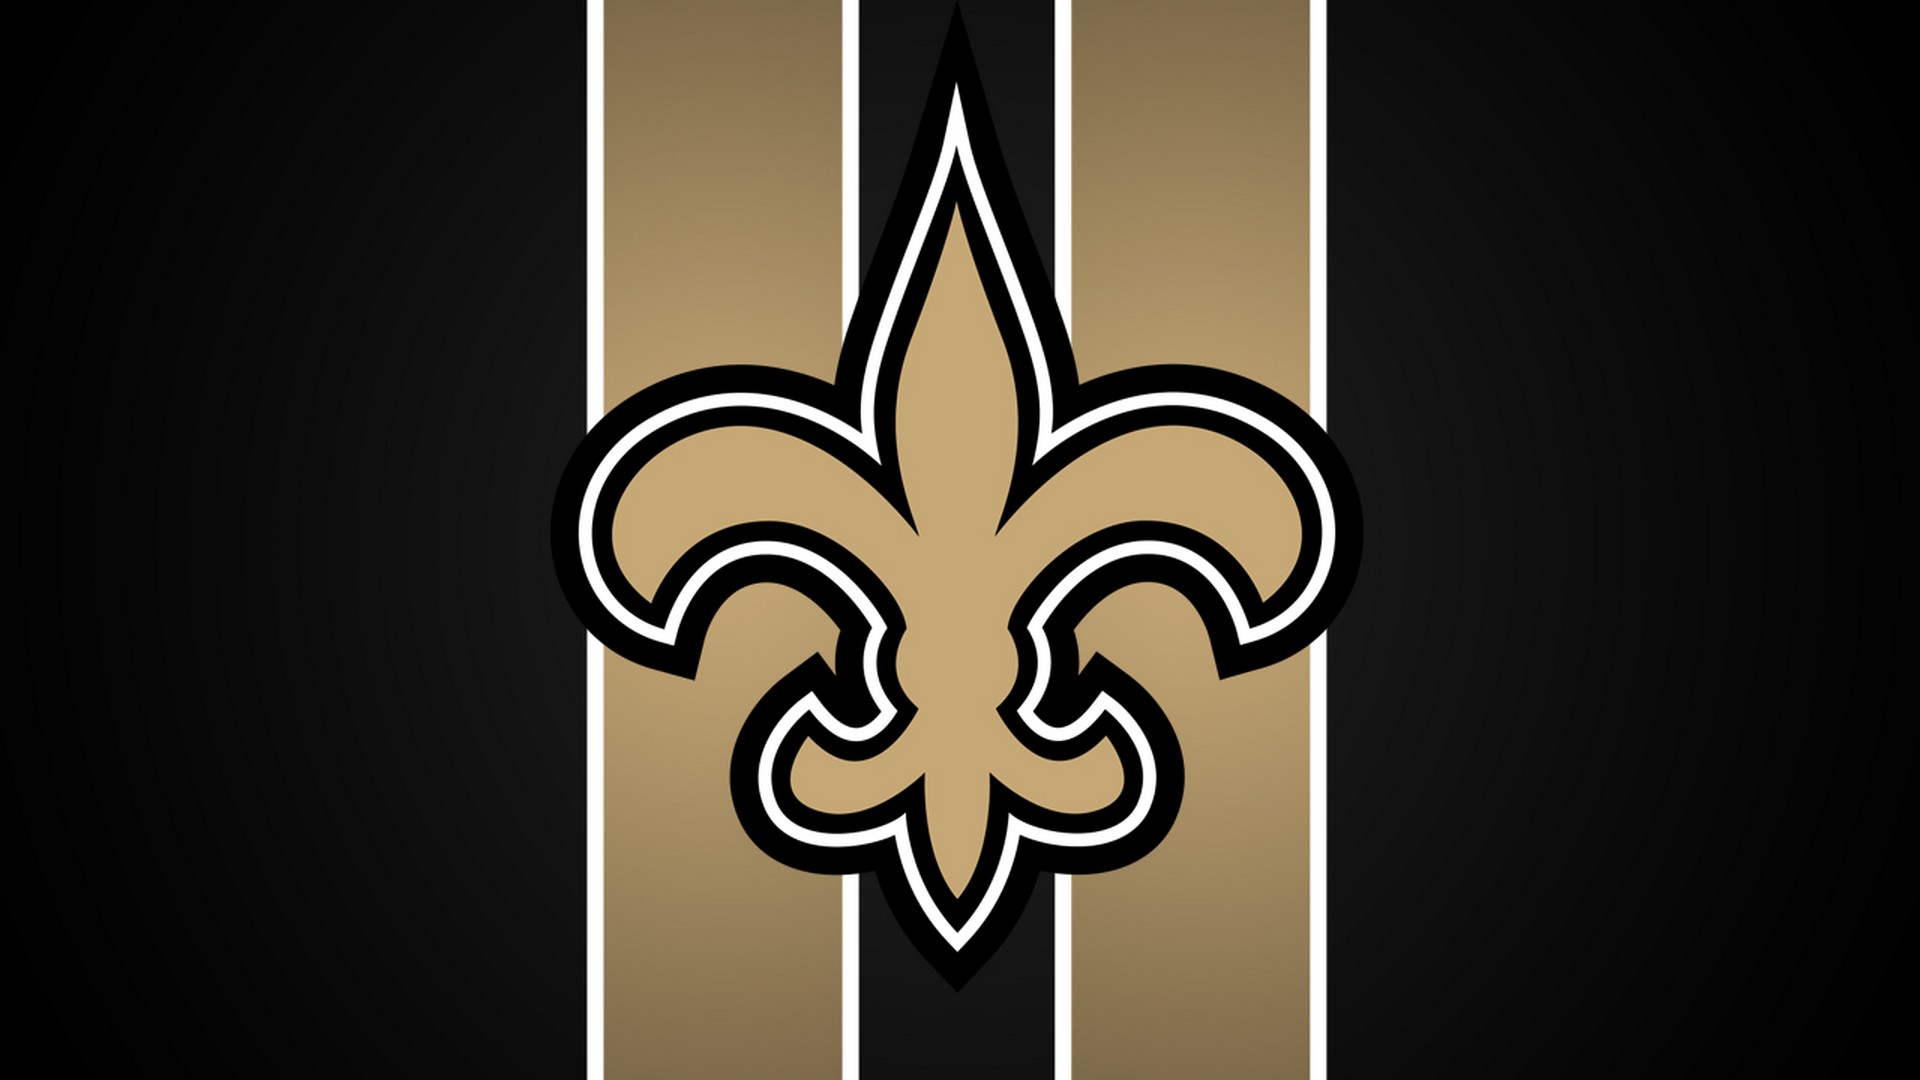 HD Backgrounds New Orleans Saints NFL with resolution 1920x1080 pixel. You can make this wallpaper for your Mac or Windows Desktop Background, iPhone, Android or Tablet and another Smartphone device